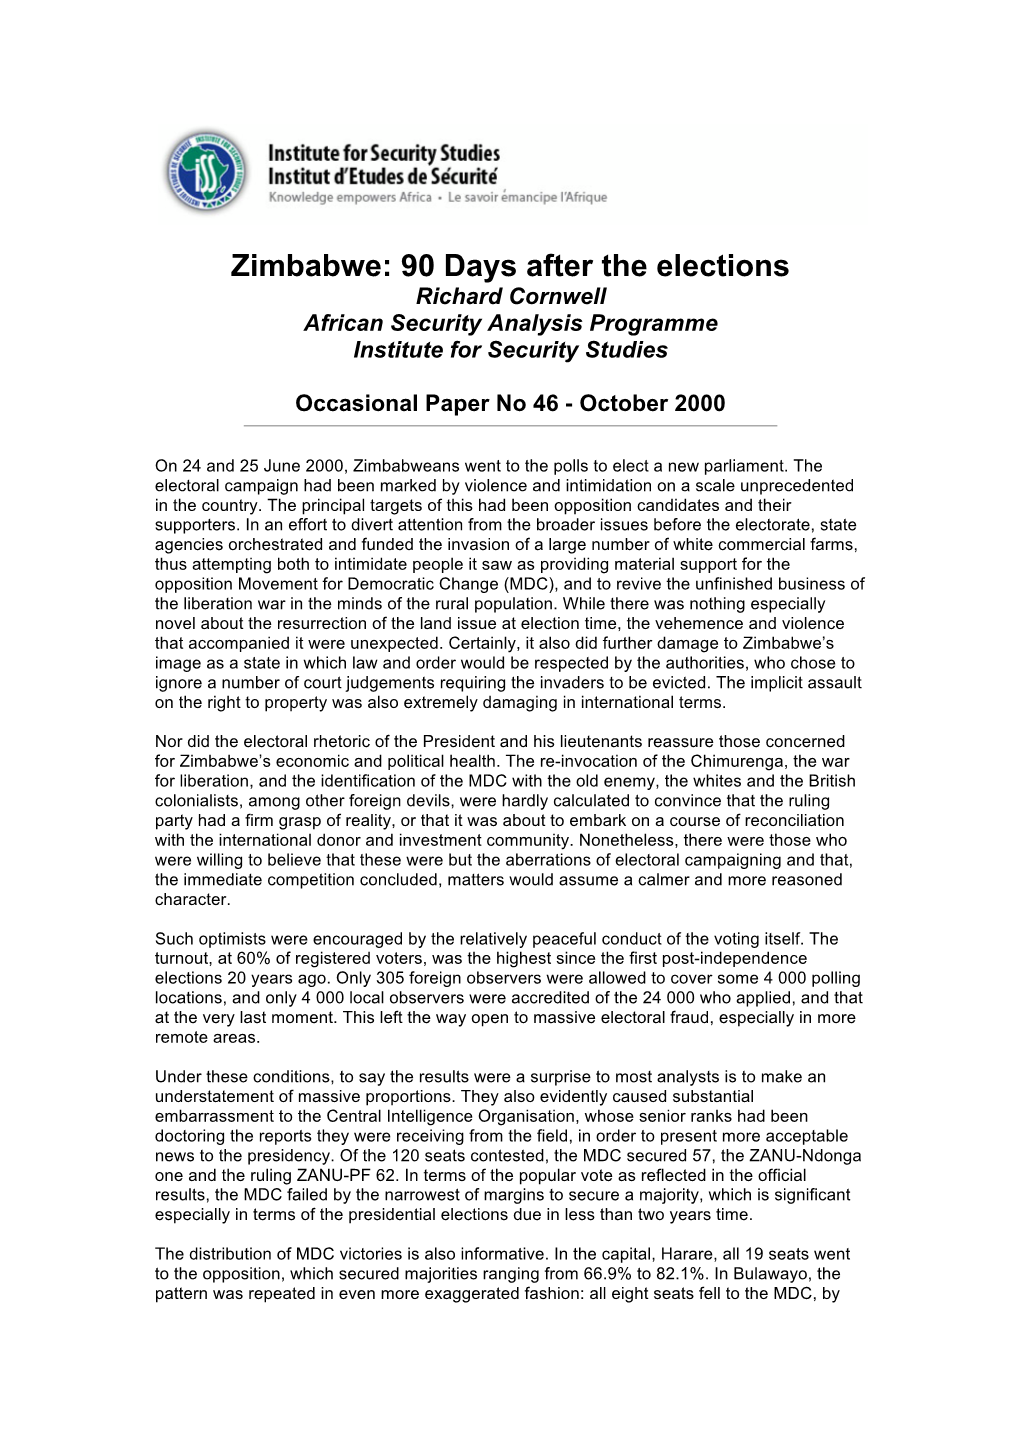 Zimbabwe: 90 Days After the Elections Richard Cornwell African Security Analysis Programme Institute for Security Studies